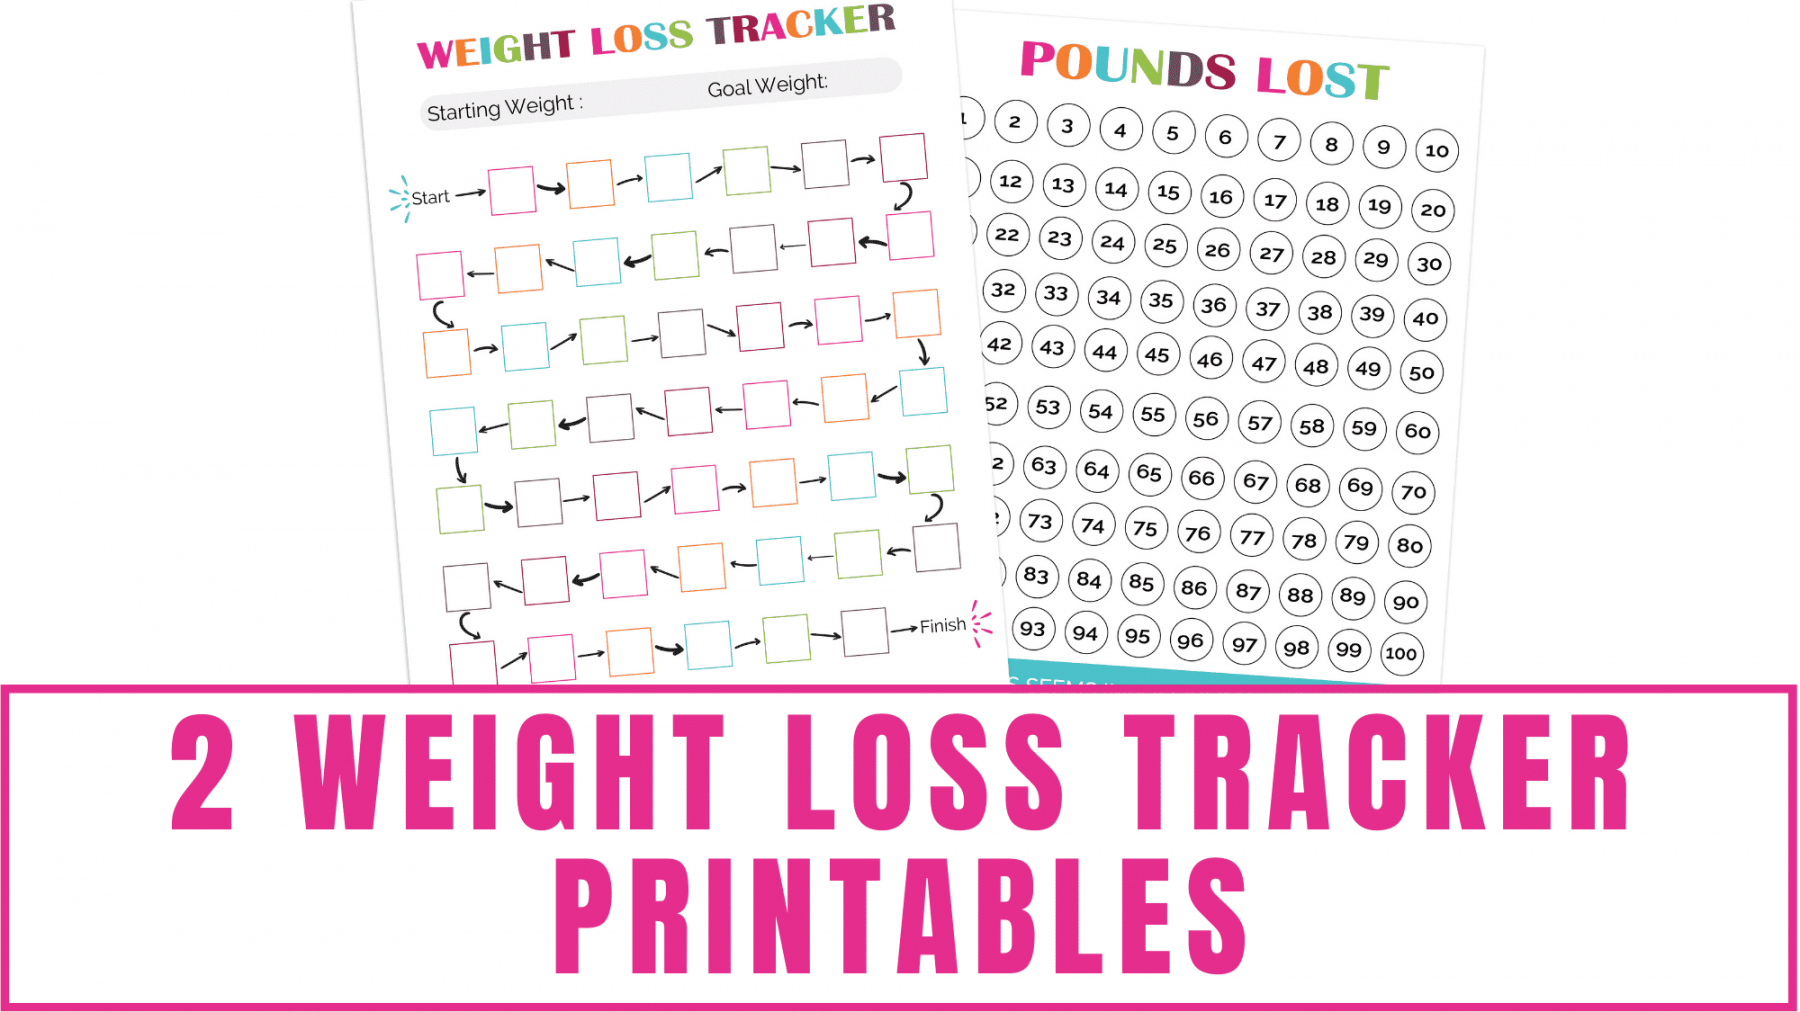 Weight Loss Tracker Printables - Freebie Finding Mom - FREE Printables - Free Printable Weight Loss Chart